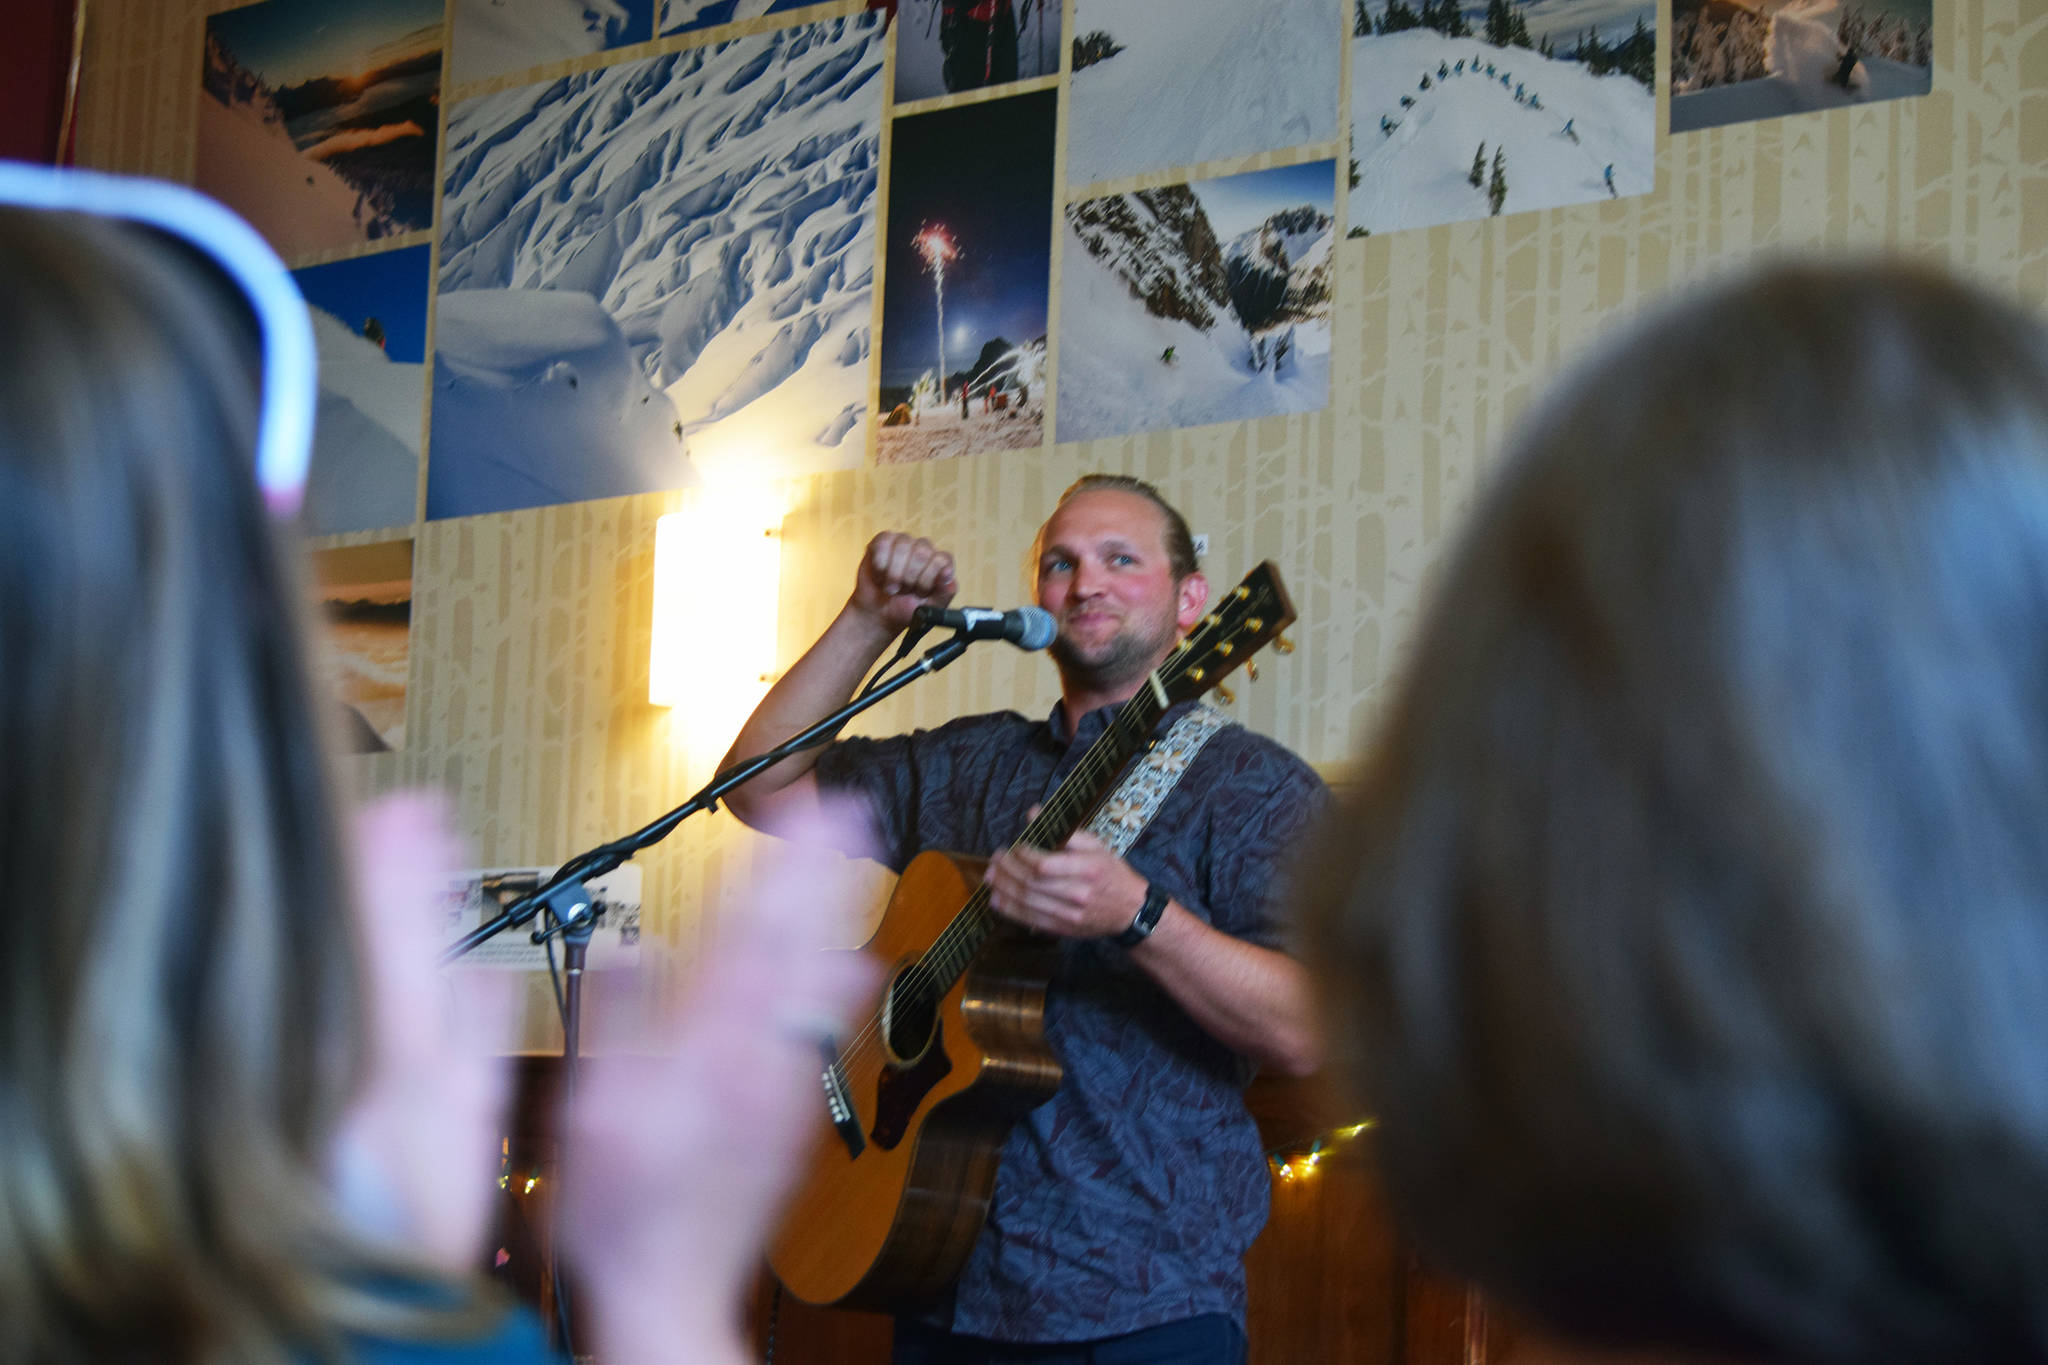 High school teacher turned full-time musican comes back to Juneau